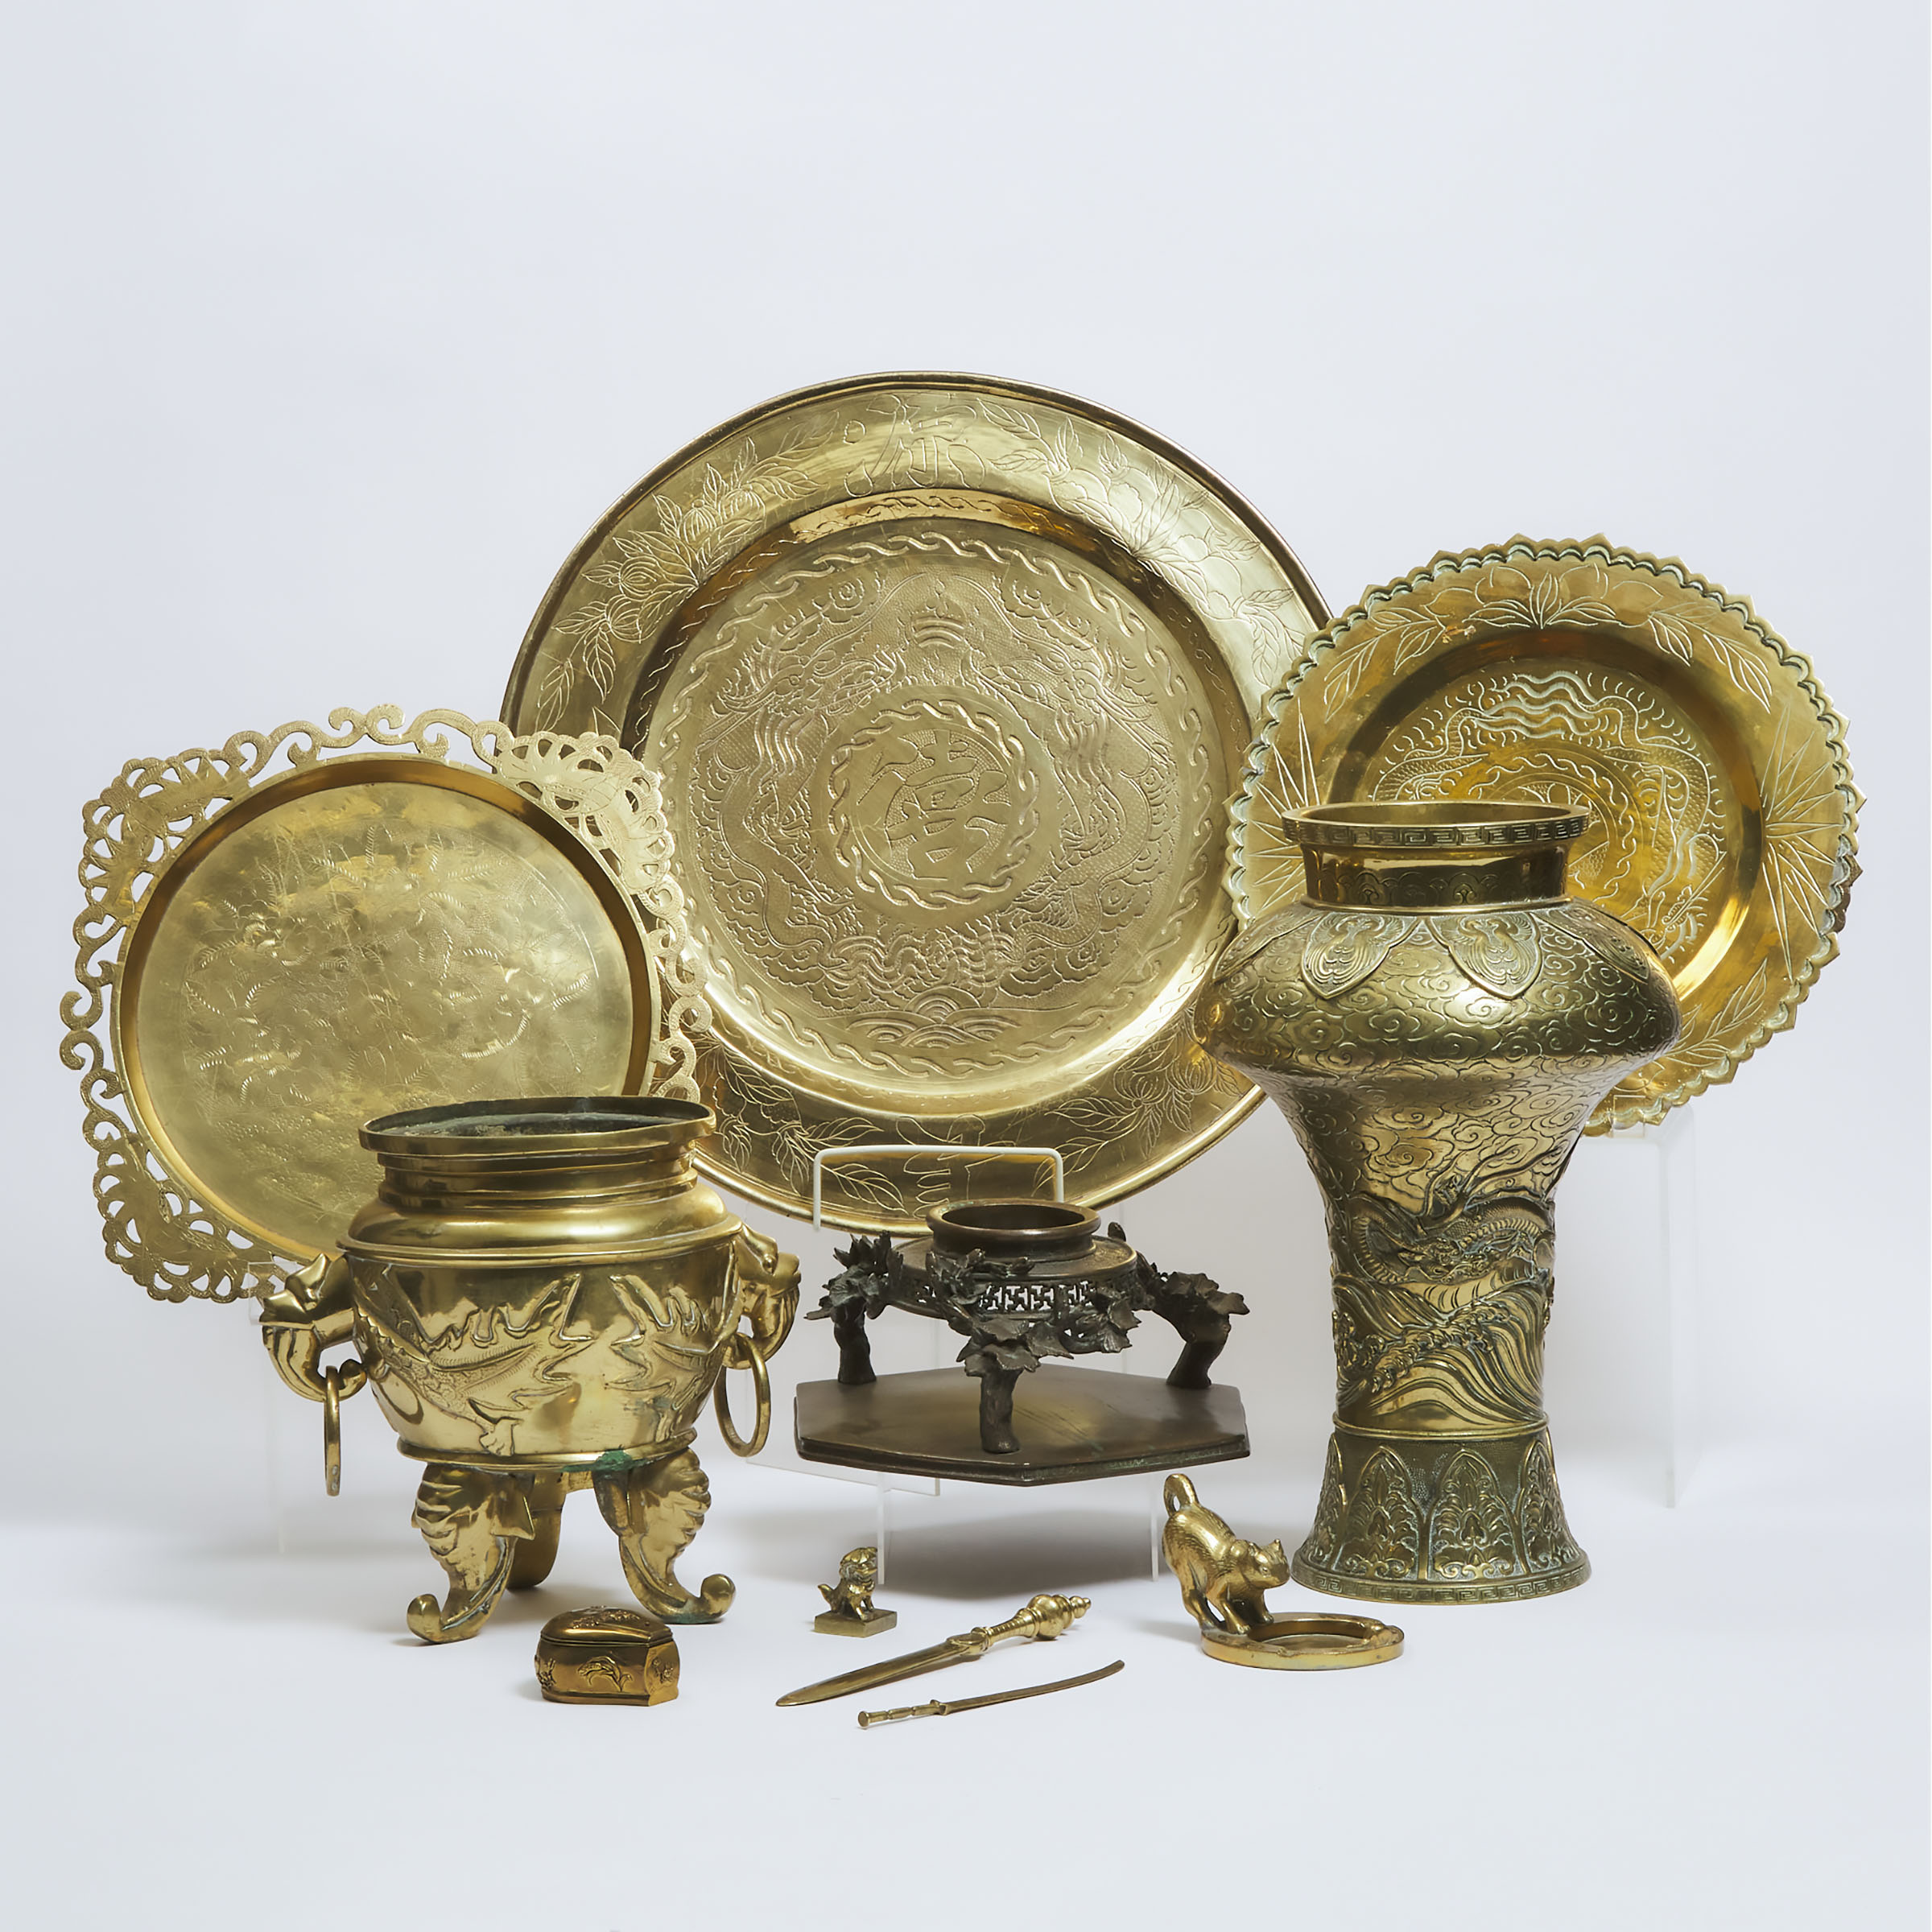 A Group of Eleven Chinese Brass and Bronze Platters, Vases, and Other Wares, Early to Mid 20th Century